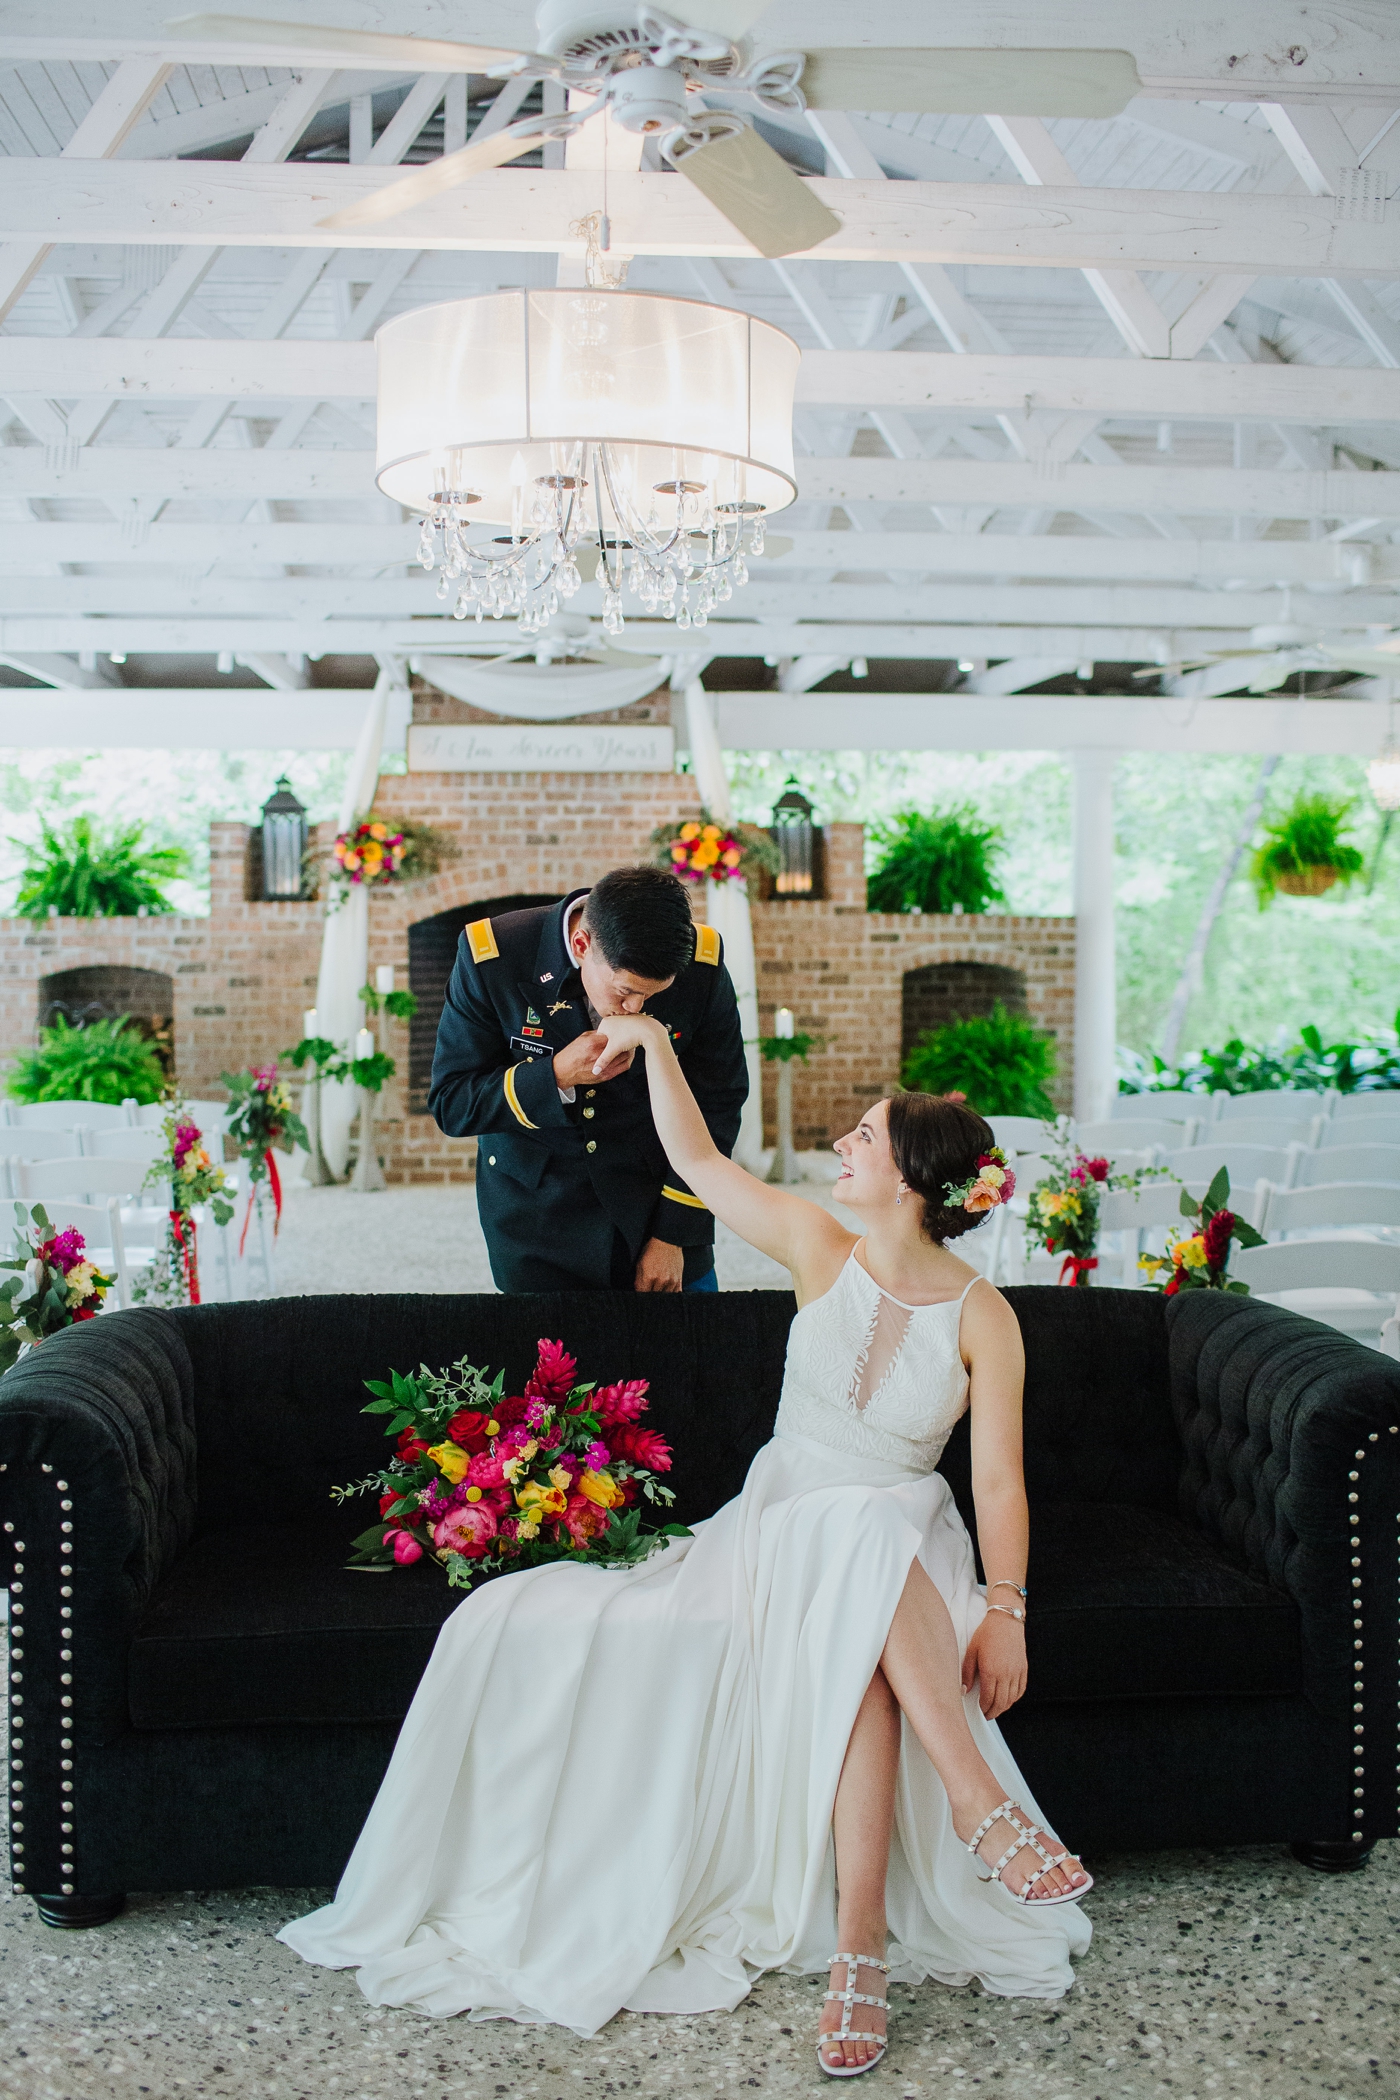 Colorful spring wedding in Savannah – Izzy and Co. Photography